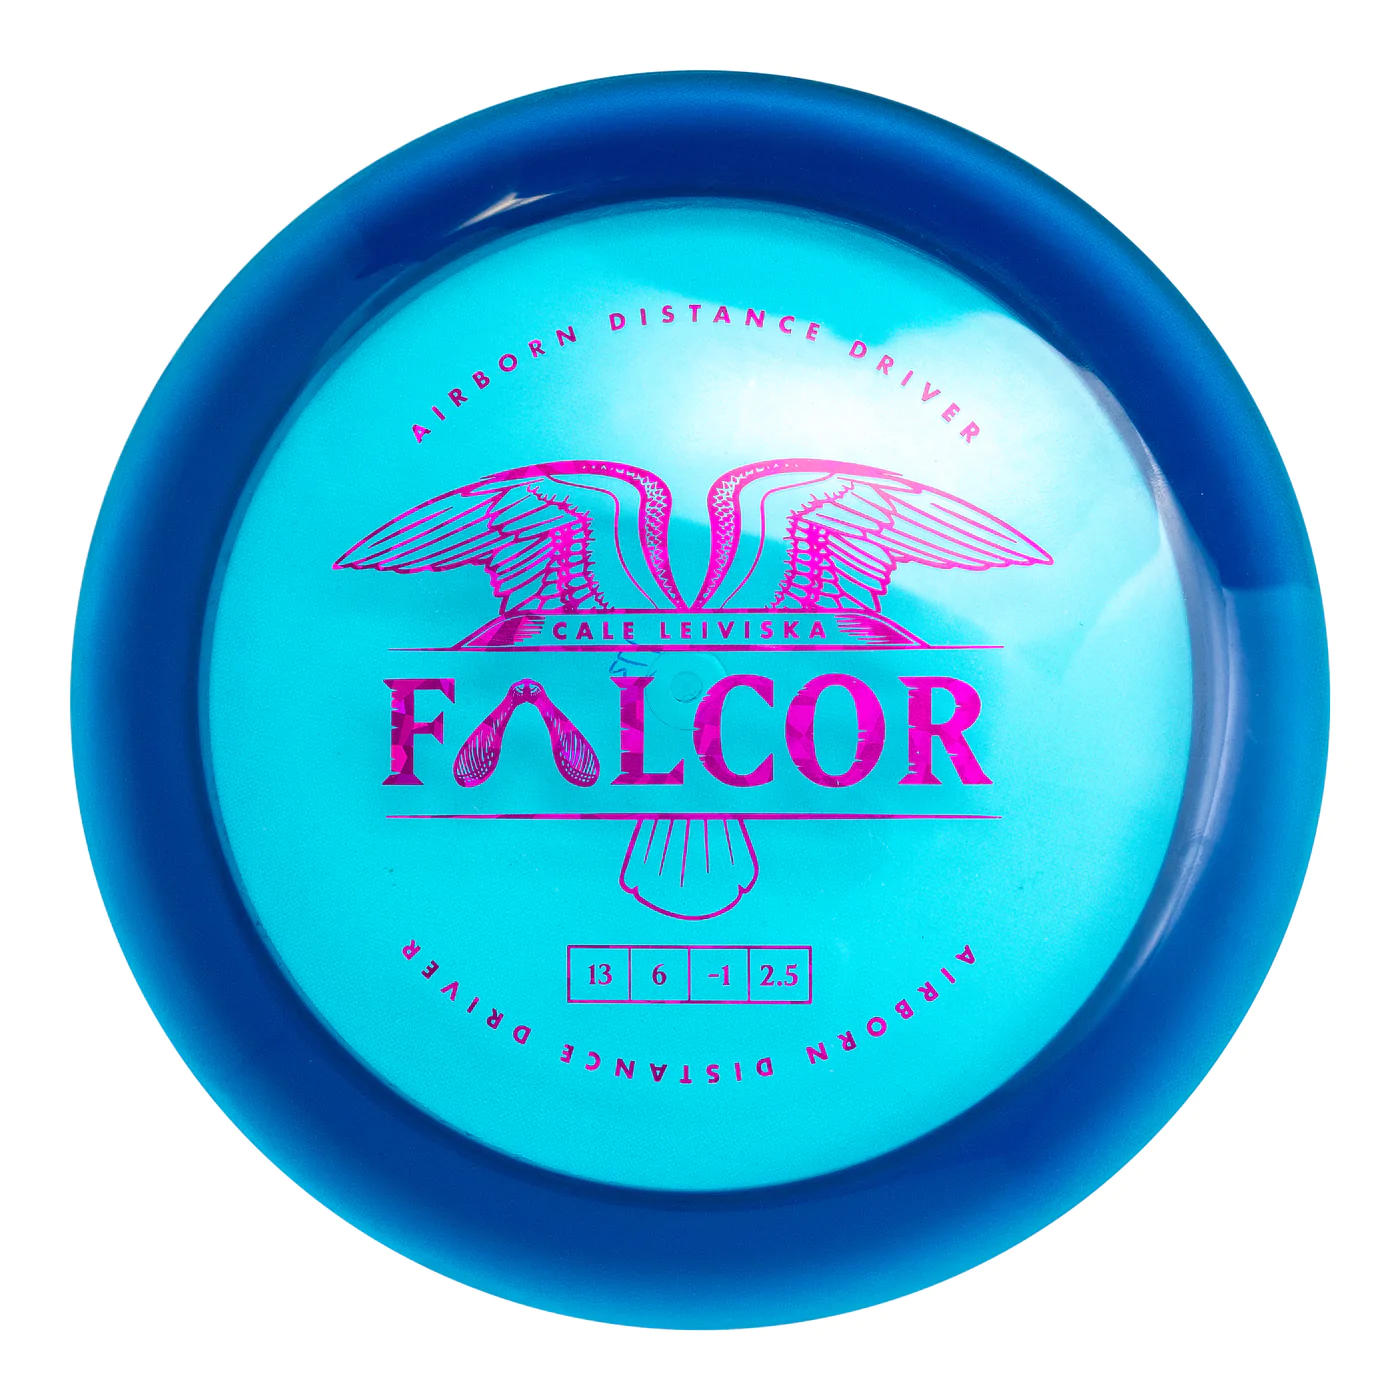 Prodigy 400 D2 Falcor (by Airborn) Distance Driver with Airborn Cale Leiviska Stock Stamp - Speed 13